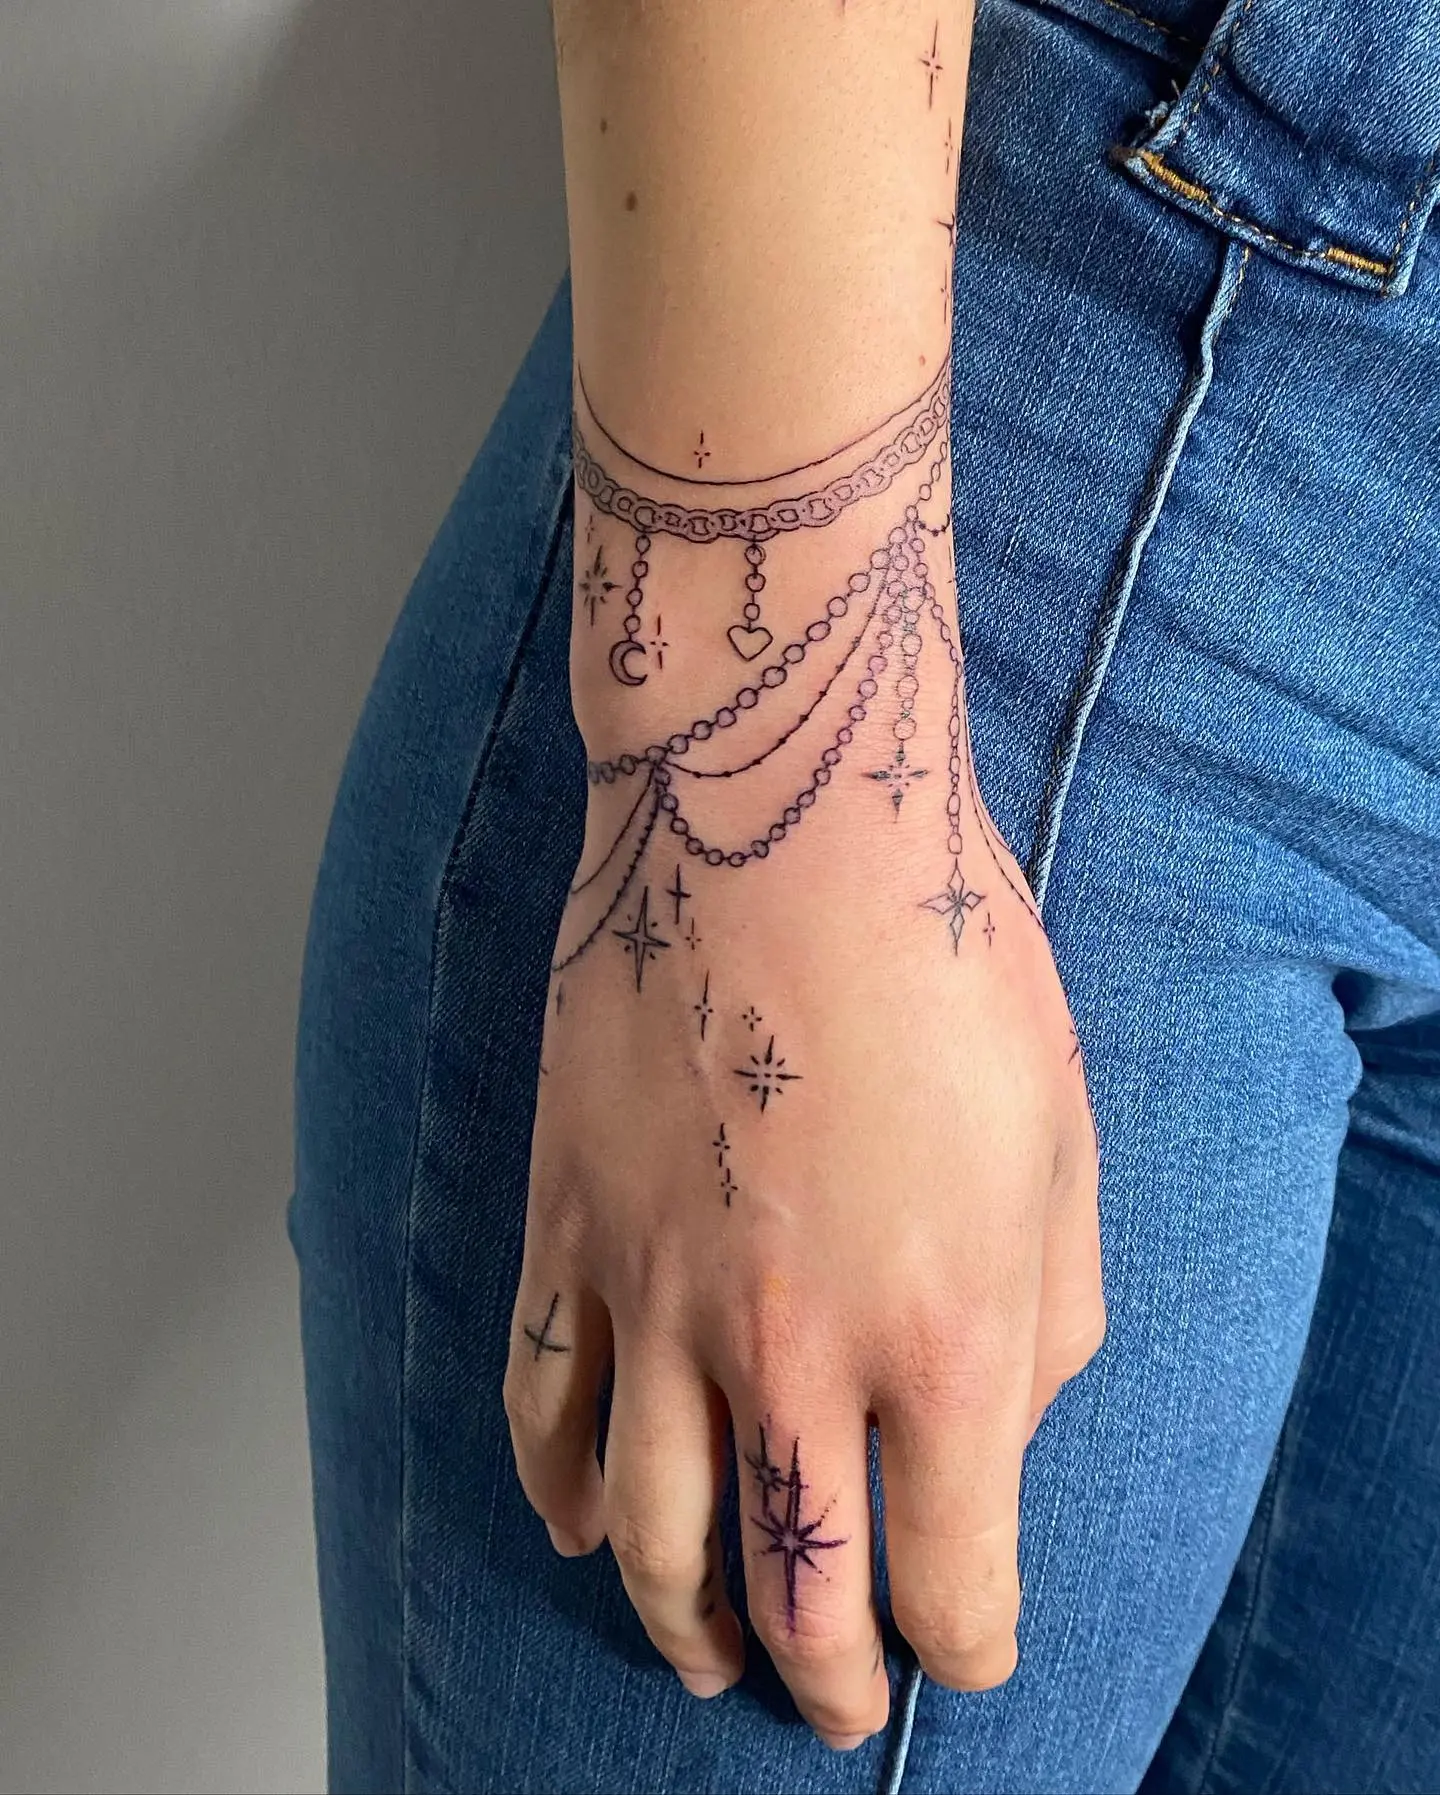 Finger and Hand Tattoo